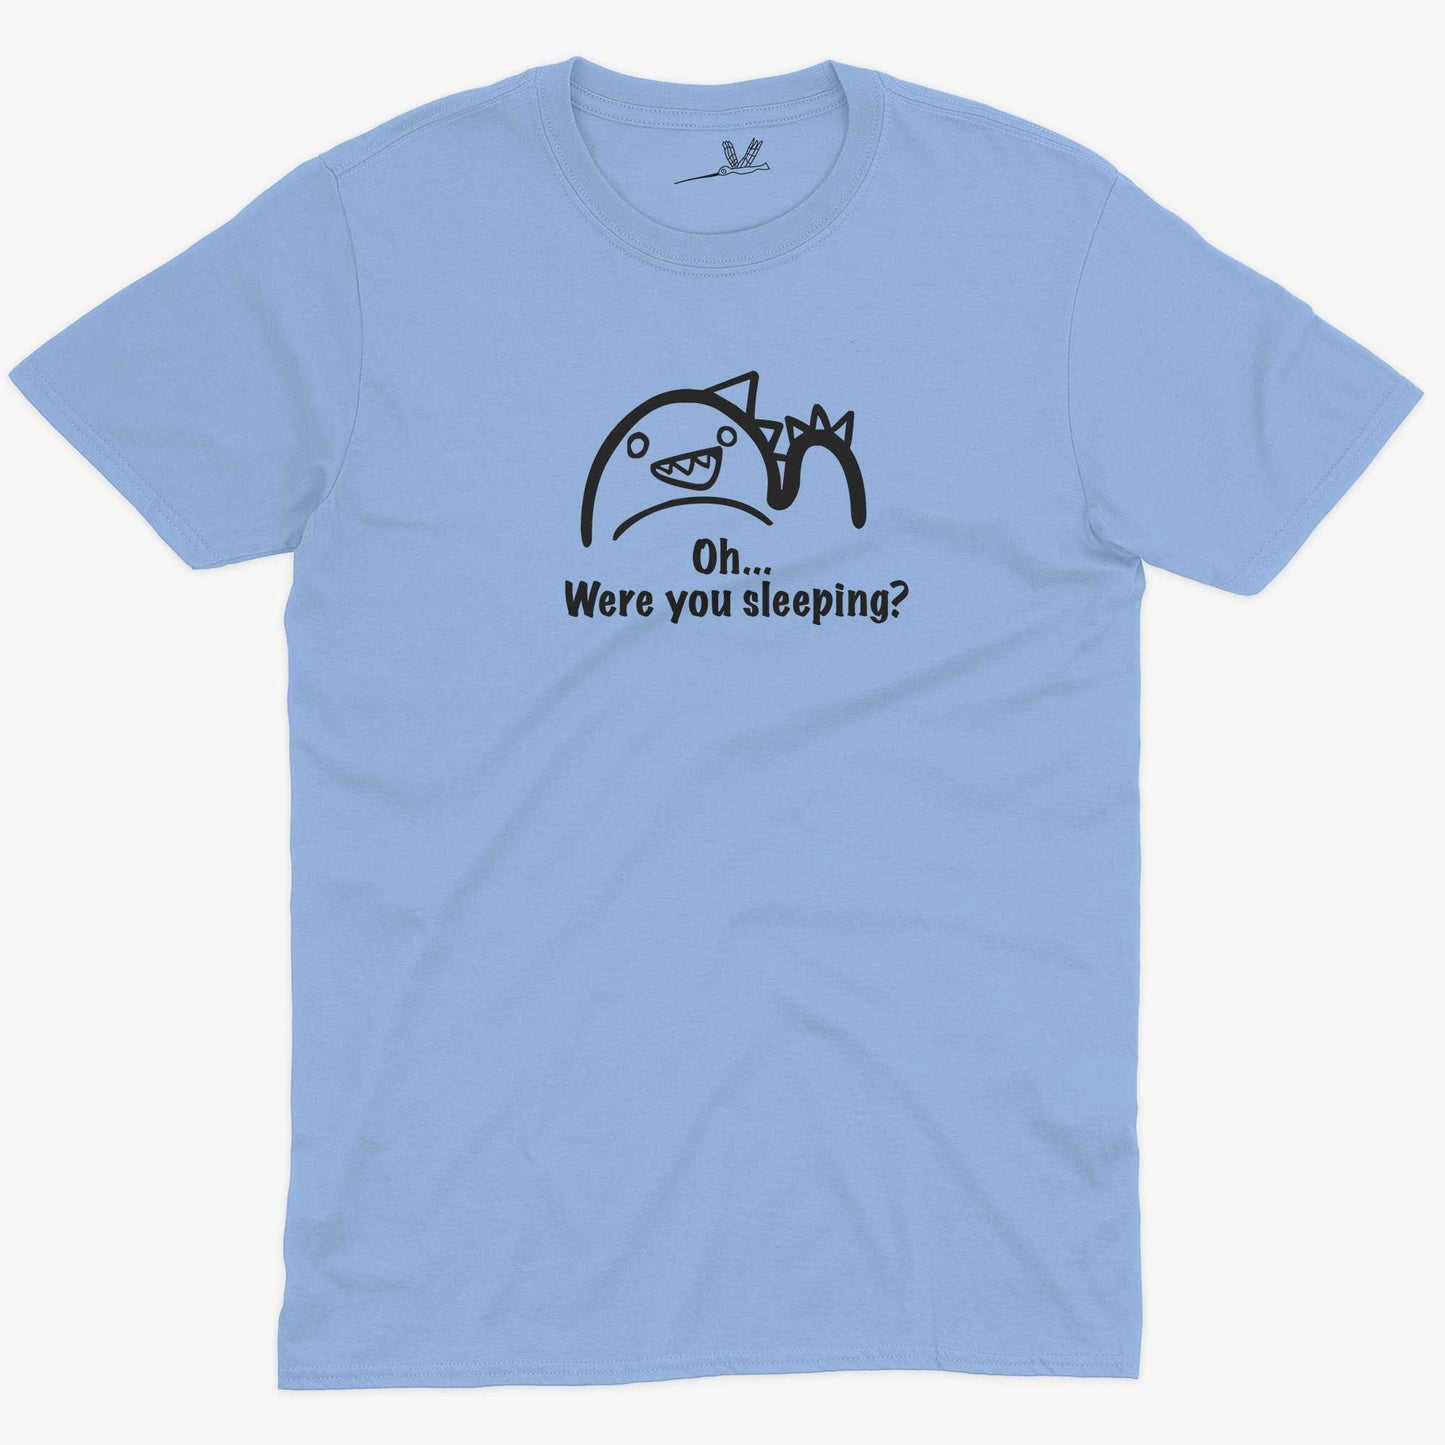 Oh...Were you sleeping? Women's or Unisex Funny T-shirt-Baby Blue-Unisex